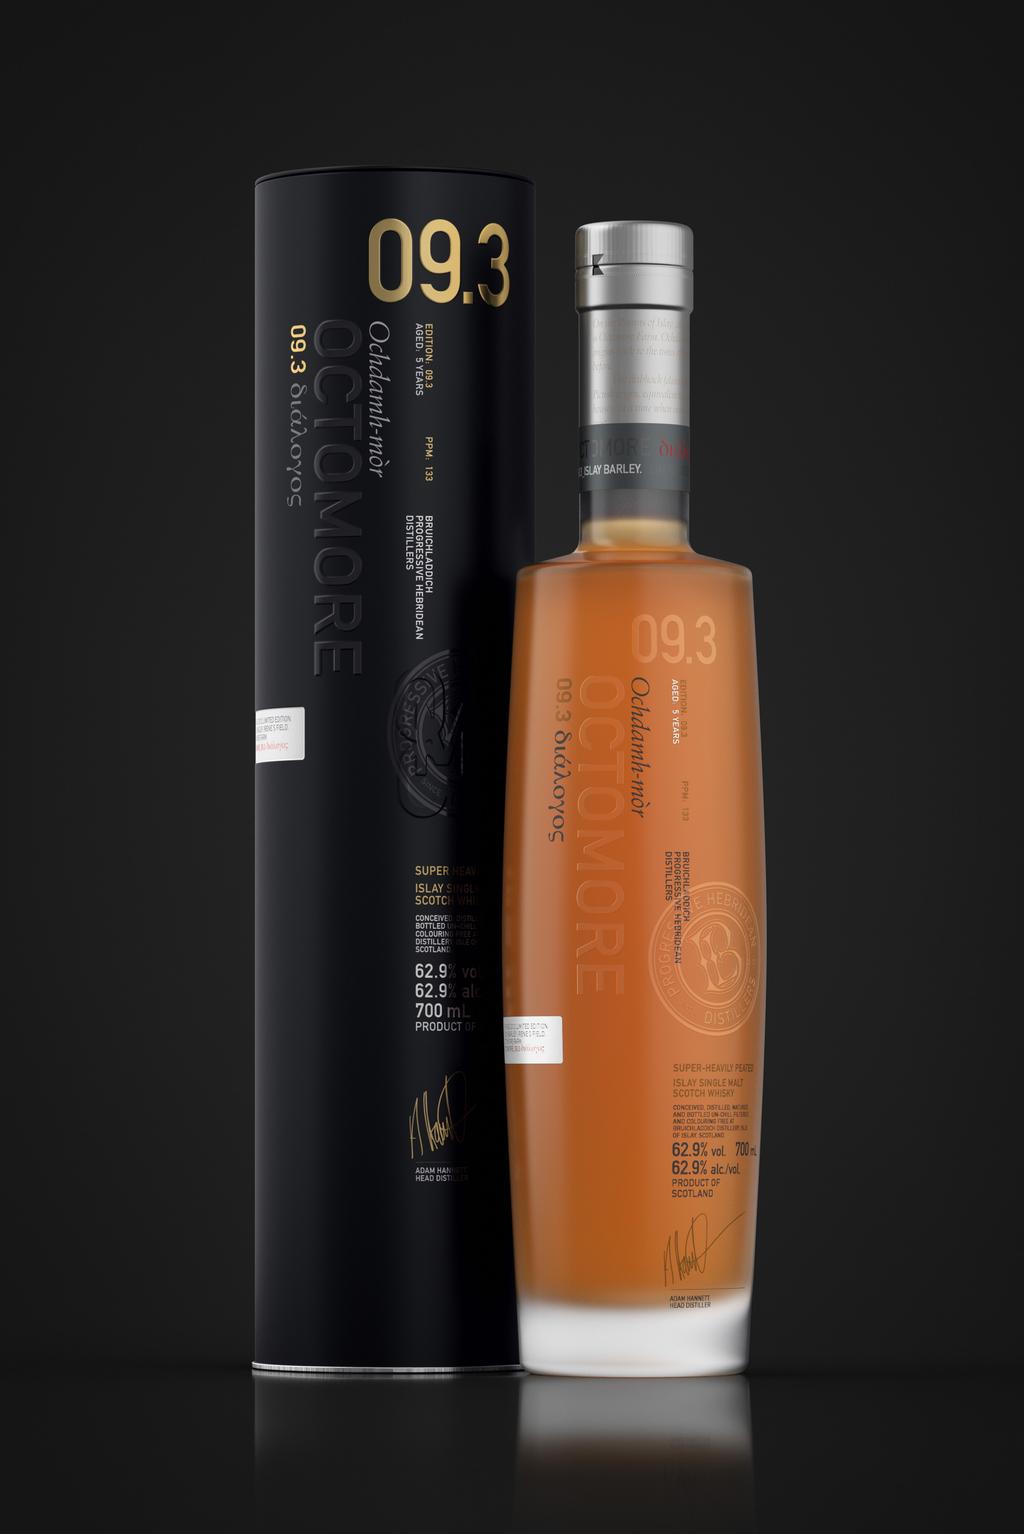 EDITION: 09.3 PPM: 133 AGED: 5 YEARS 100% FARM GROWN BARLEY. 09.3 διάλογος NATURALISTIC OBSERVATION. Just 52 tonnes of precious Islay barley were malted to produce this single farm Octomore 09.